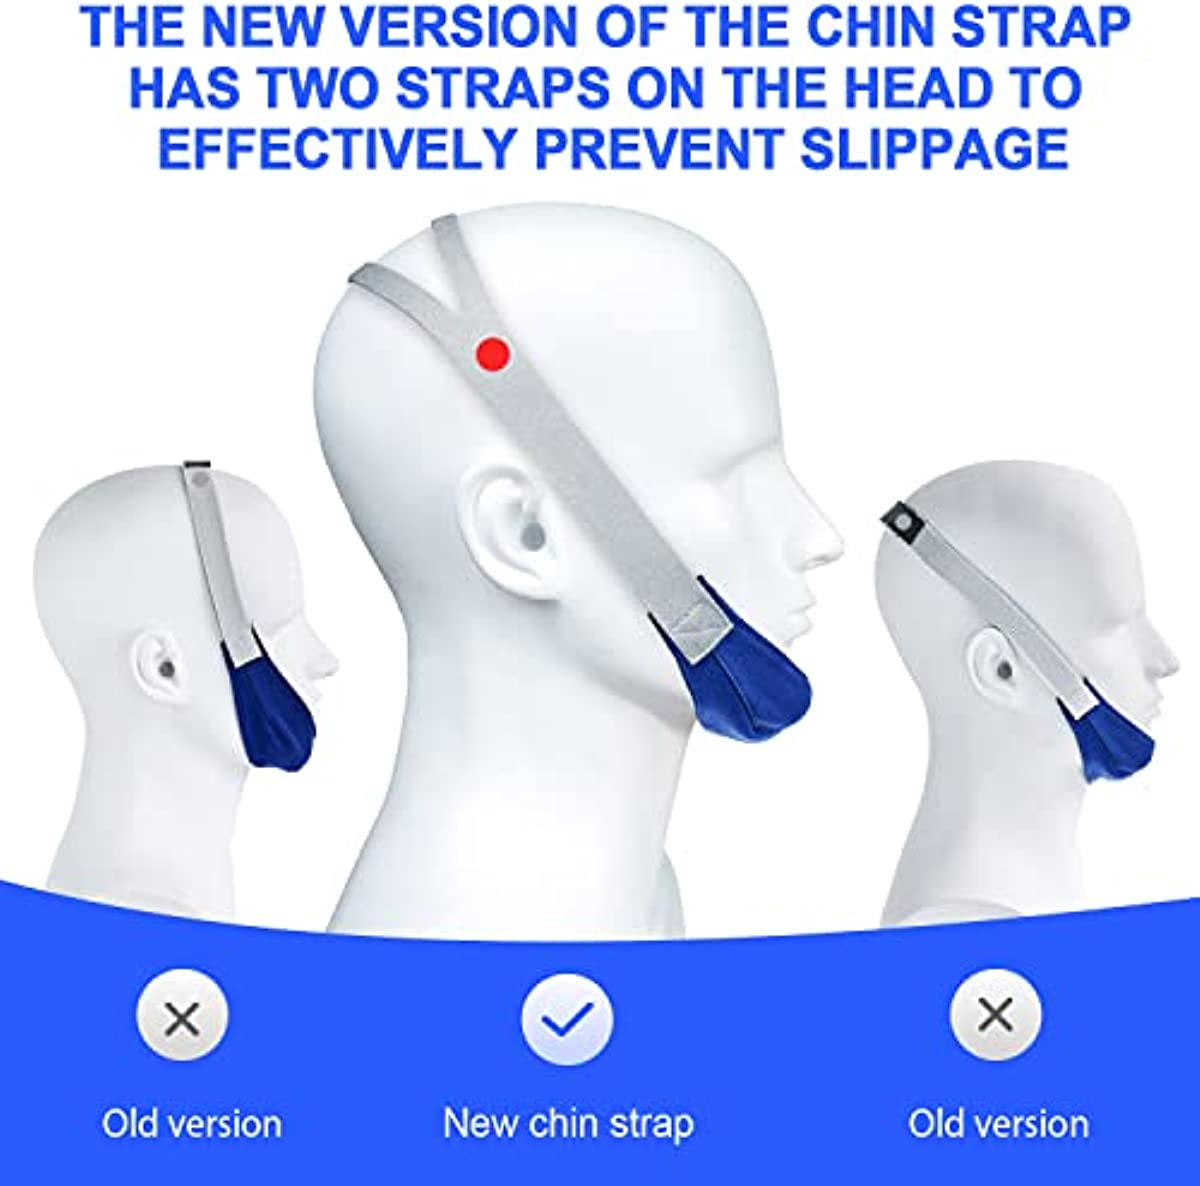 2 Packs Chin Straps for Users and Mouth Breathers - Anti Snoring Chin Strap for Men and Women,Chin Straps to Reduce Air Loss, Instant Mouth-Snoring Relief & Improved Nighttime Sleeping